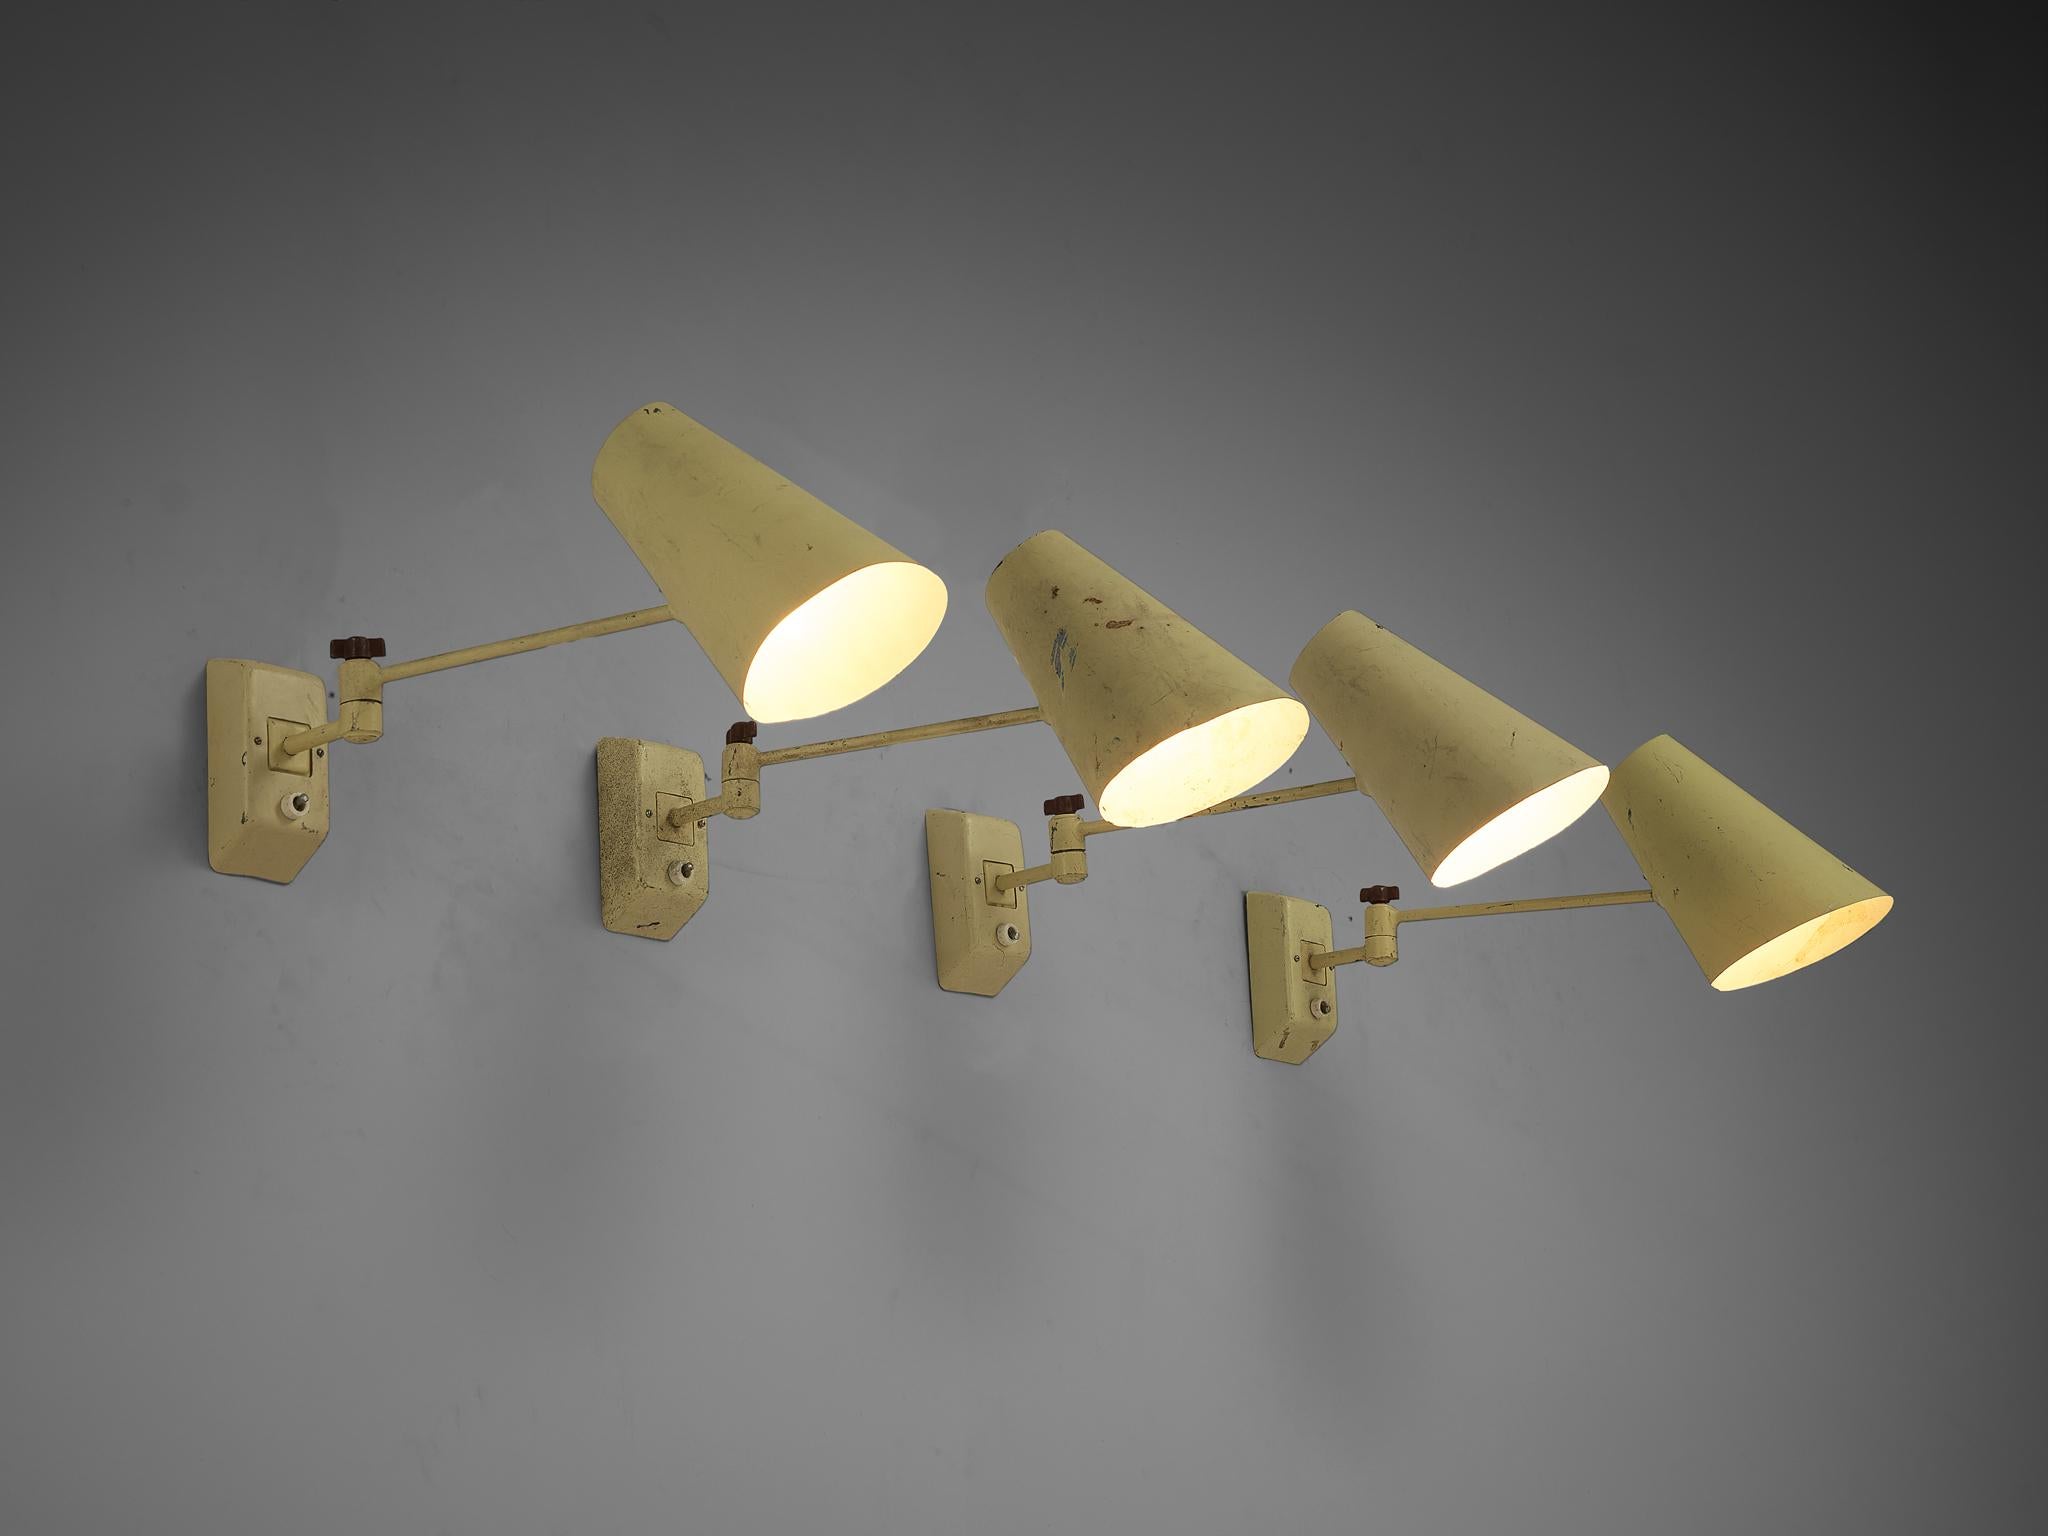 Set of four wall lights, lacquered metal, Europe, 1950s

Simple and modest mid century wall lights in pale yellow. These lights are made in lacquered metal with adjustable rods and shades. The base of the lamps is attached to the wall and the light